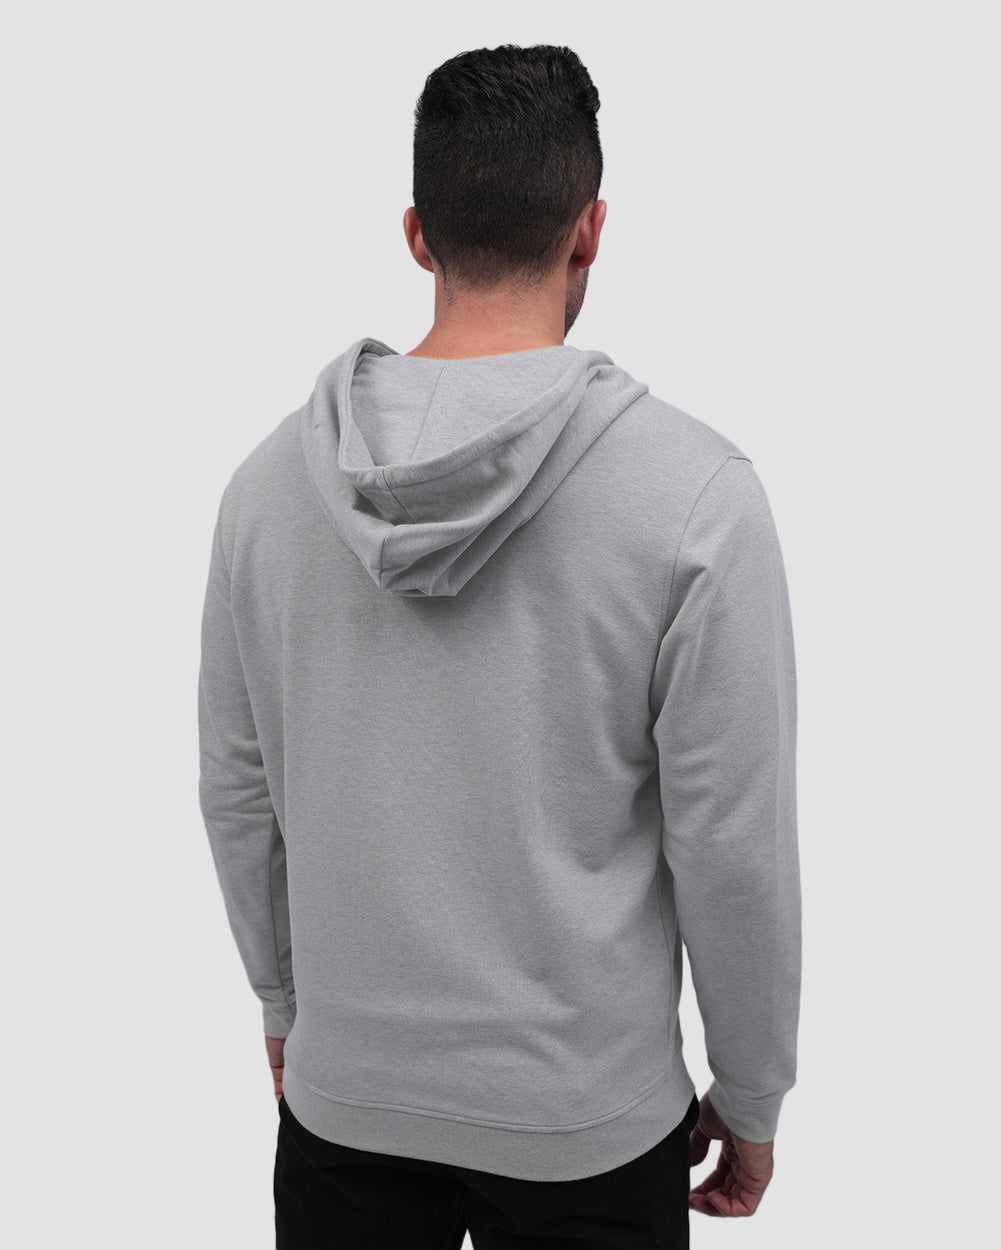 INTO THE AM Pullover Hoodies for Men - Lightweight Casual Fleece